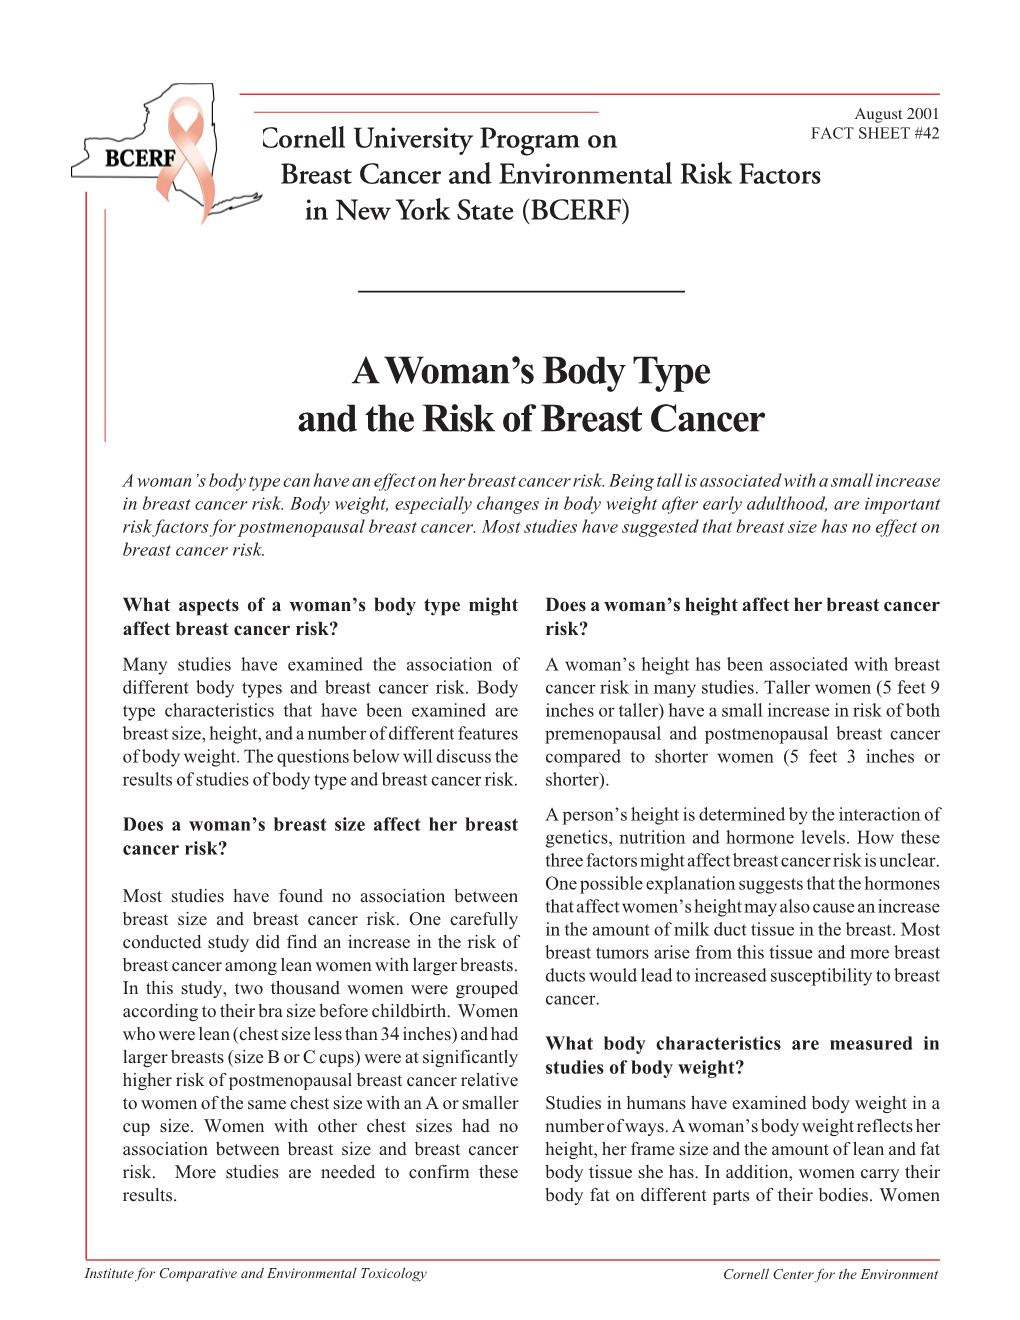 A Woman's Body Type and the Risk of Breast Cancer